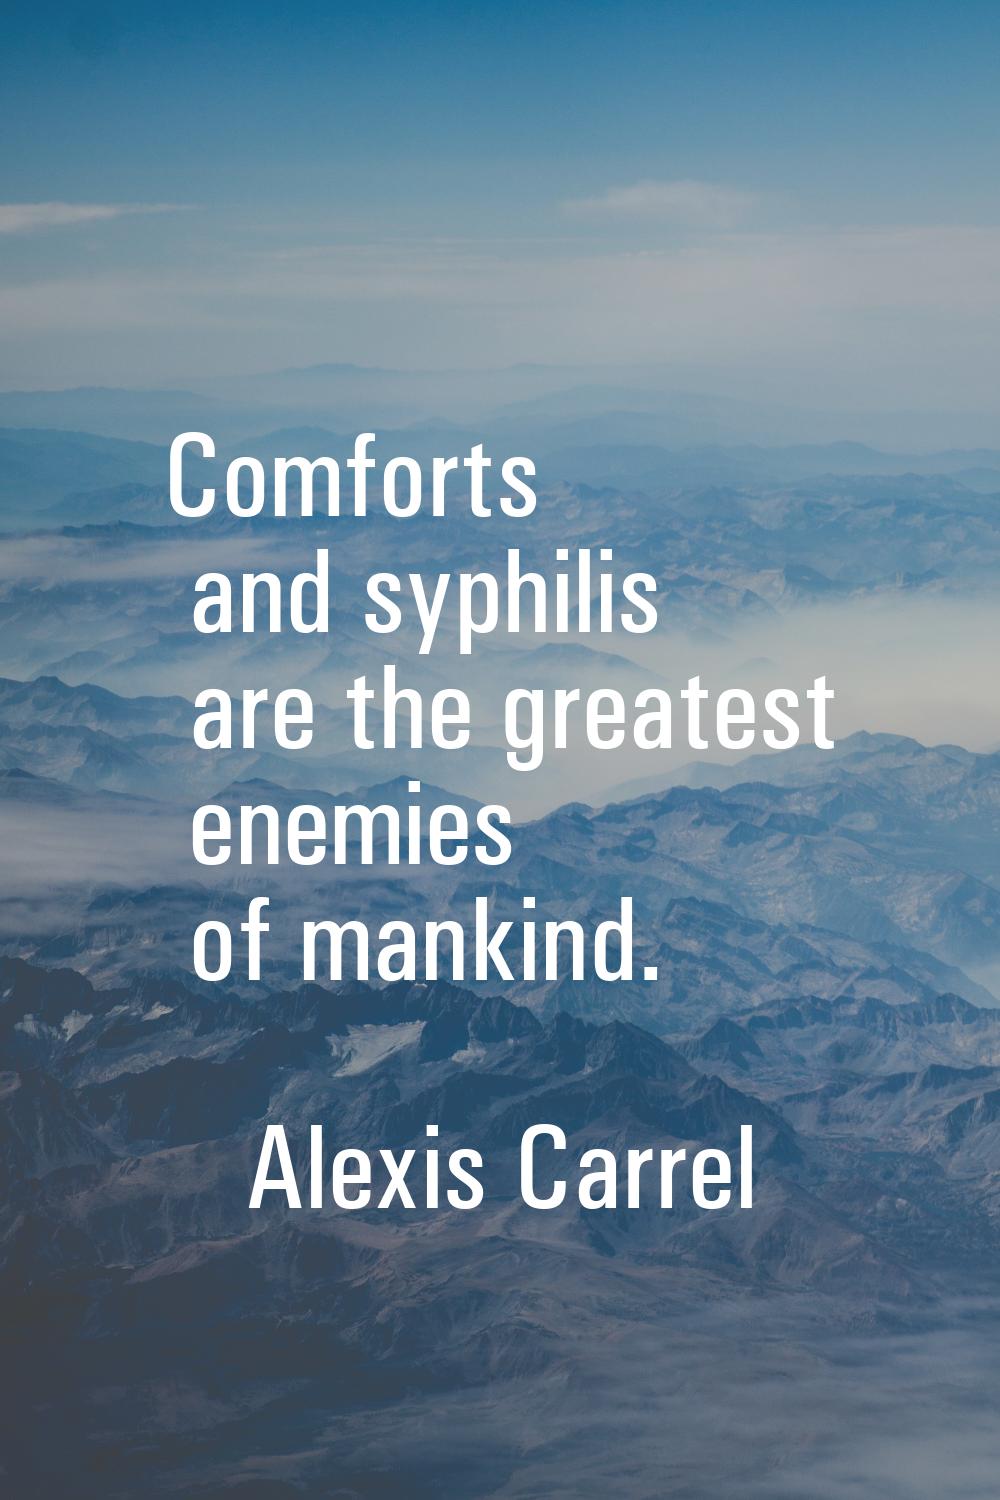 Comforts and syphilis are the greatest enemies of mankind.